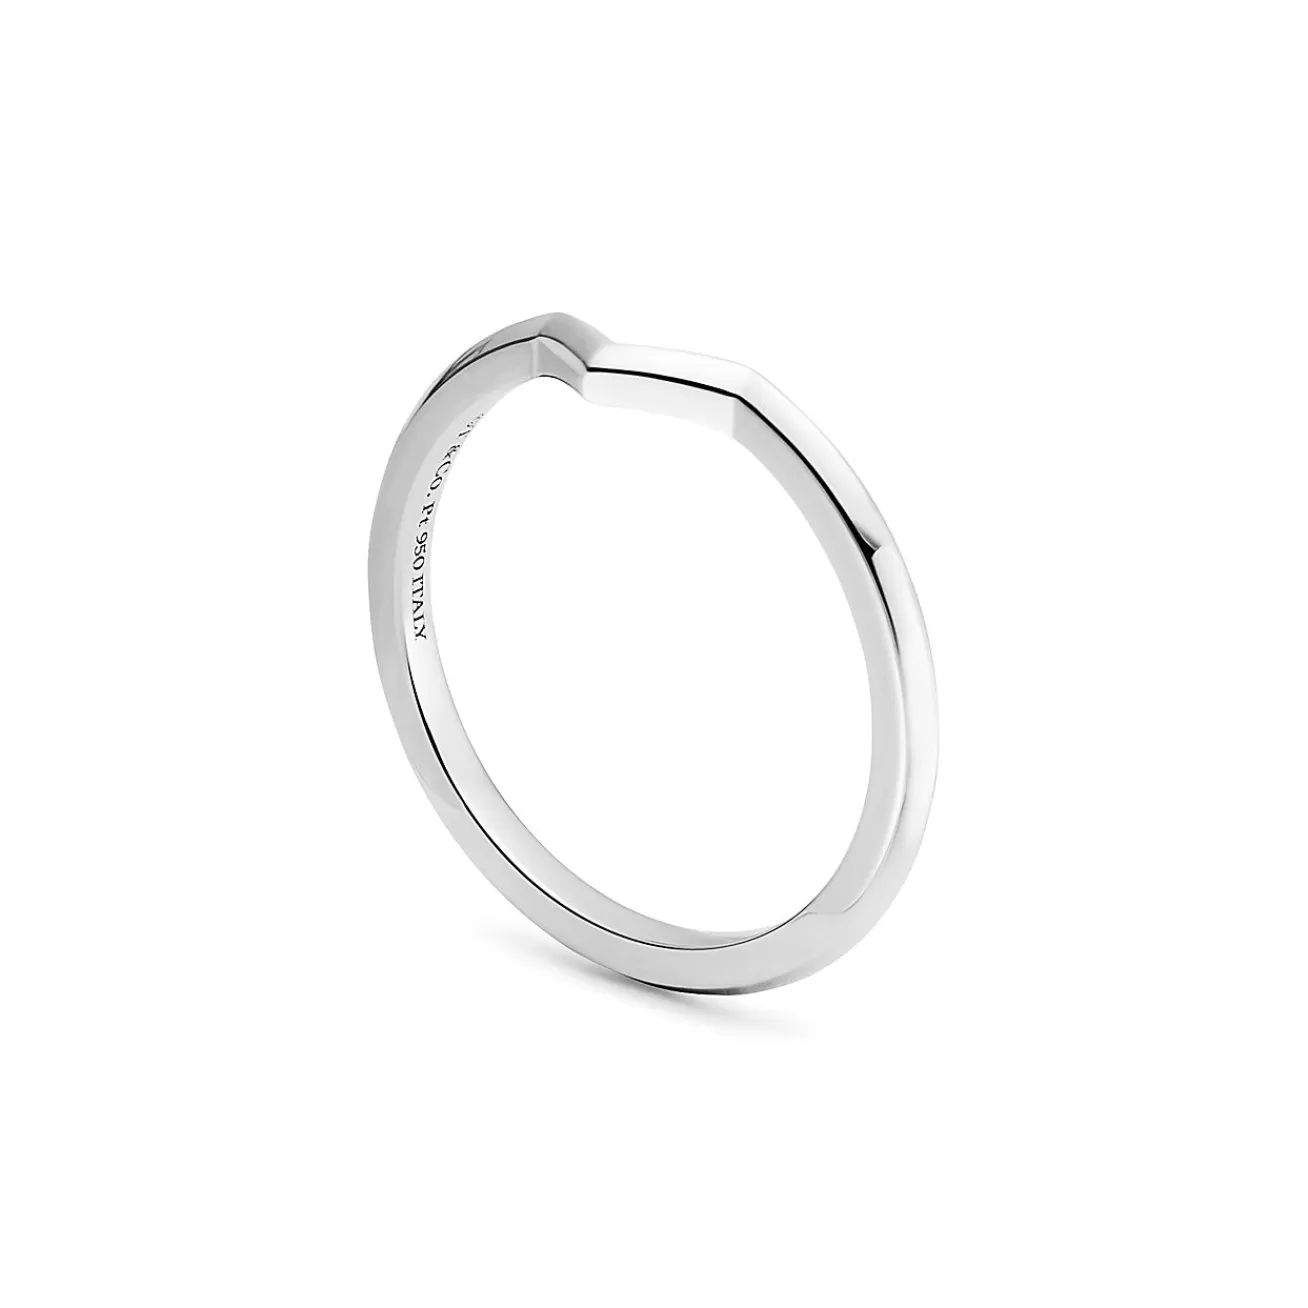 Tiffany & Co. The Tiffany® Setting V band ring in platinum, 1.7 mm wide. | ^Women Rings | Stacking Rings